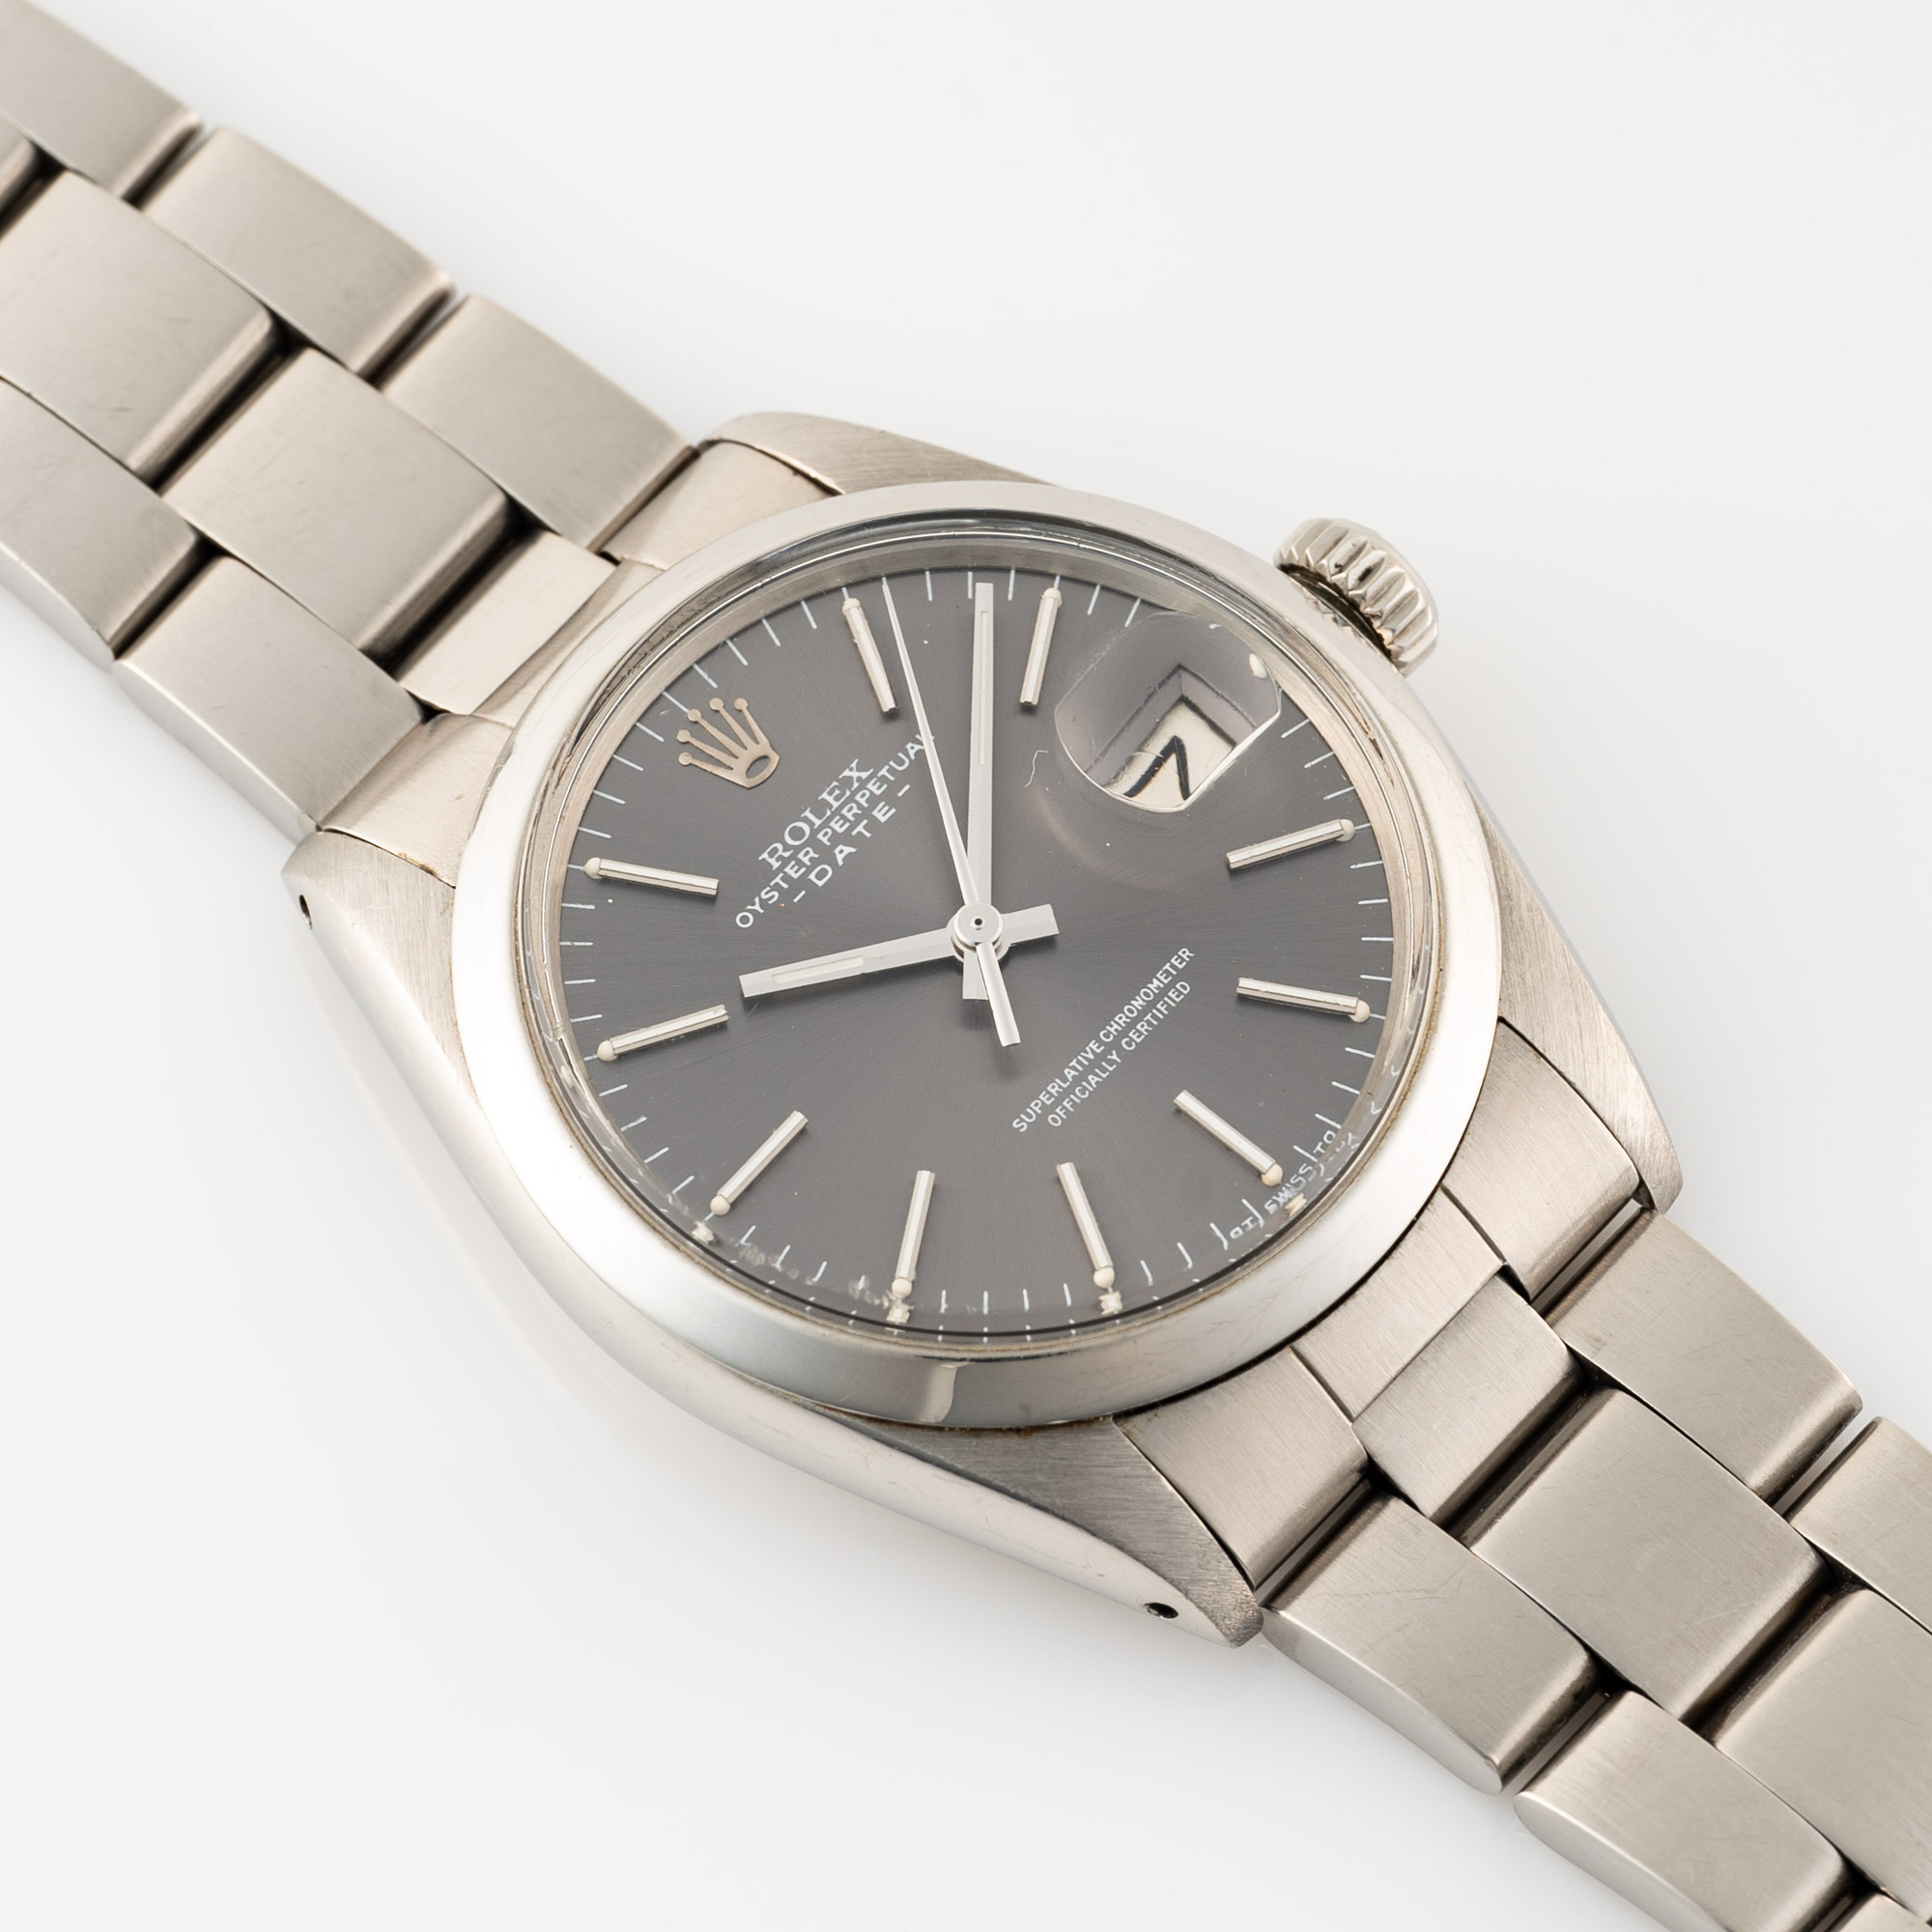 A GENTLEMAN'S SIZE STAINLESS STEEL ROLEX OYSTER PERPETUAL DATE WRIST WATCH CIRCA 1972, REF. 1500 - Image 3 of 8